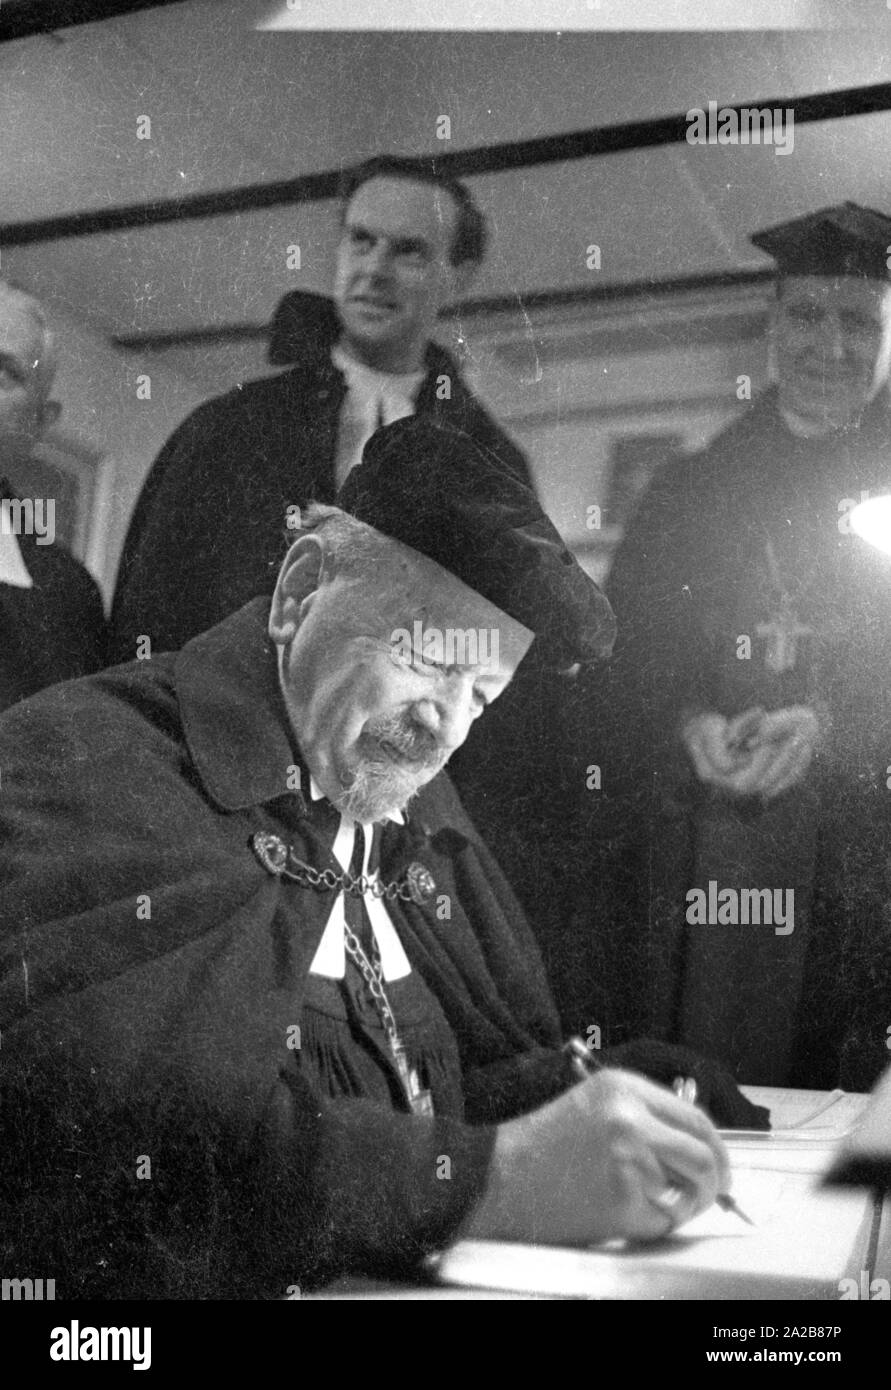 The German bishop, Otto Dibelius, participates at the groundbreaking ceremony  of the 'International Center for Reconciliation' in Coventry. Here, he probably signs the 'book of the new meeting center for reconciliation', which is located in the ruin of the bombed St. Michael's Cathedral. Behind him on the left, Reverend Bill Williams, the pastor of St. Michael's Cathedral. Stock Photo